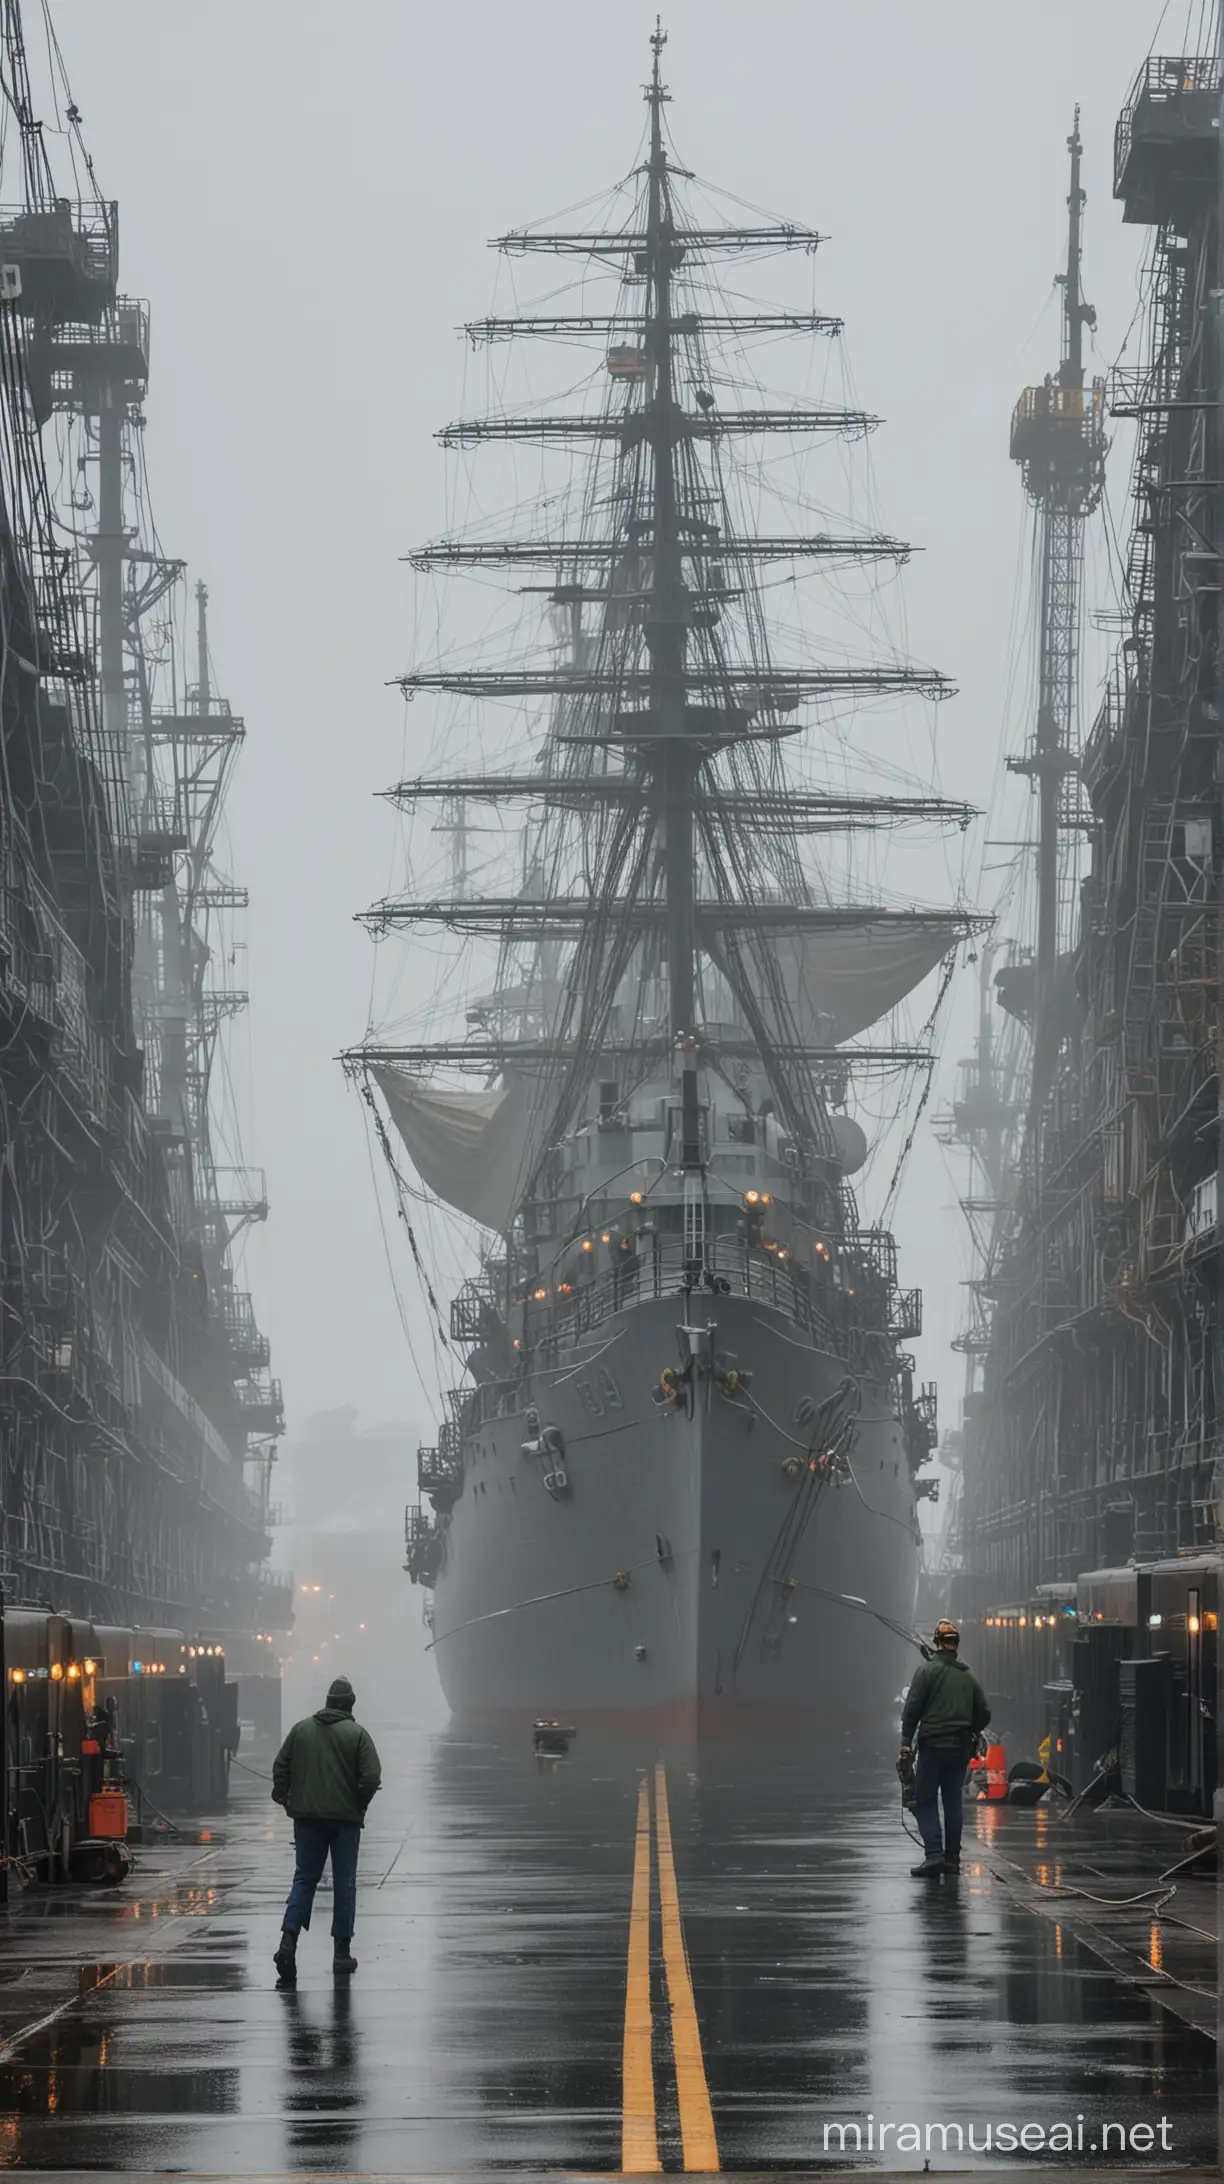 On a grey and misty morning at the Philadelphia Naval Shipyard, the USS Eldridge, a warship, emerges amidst towering generators enveloped in a greenish light. The anxious facial expressions of the crew indicate that the experiment is about to commence.

